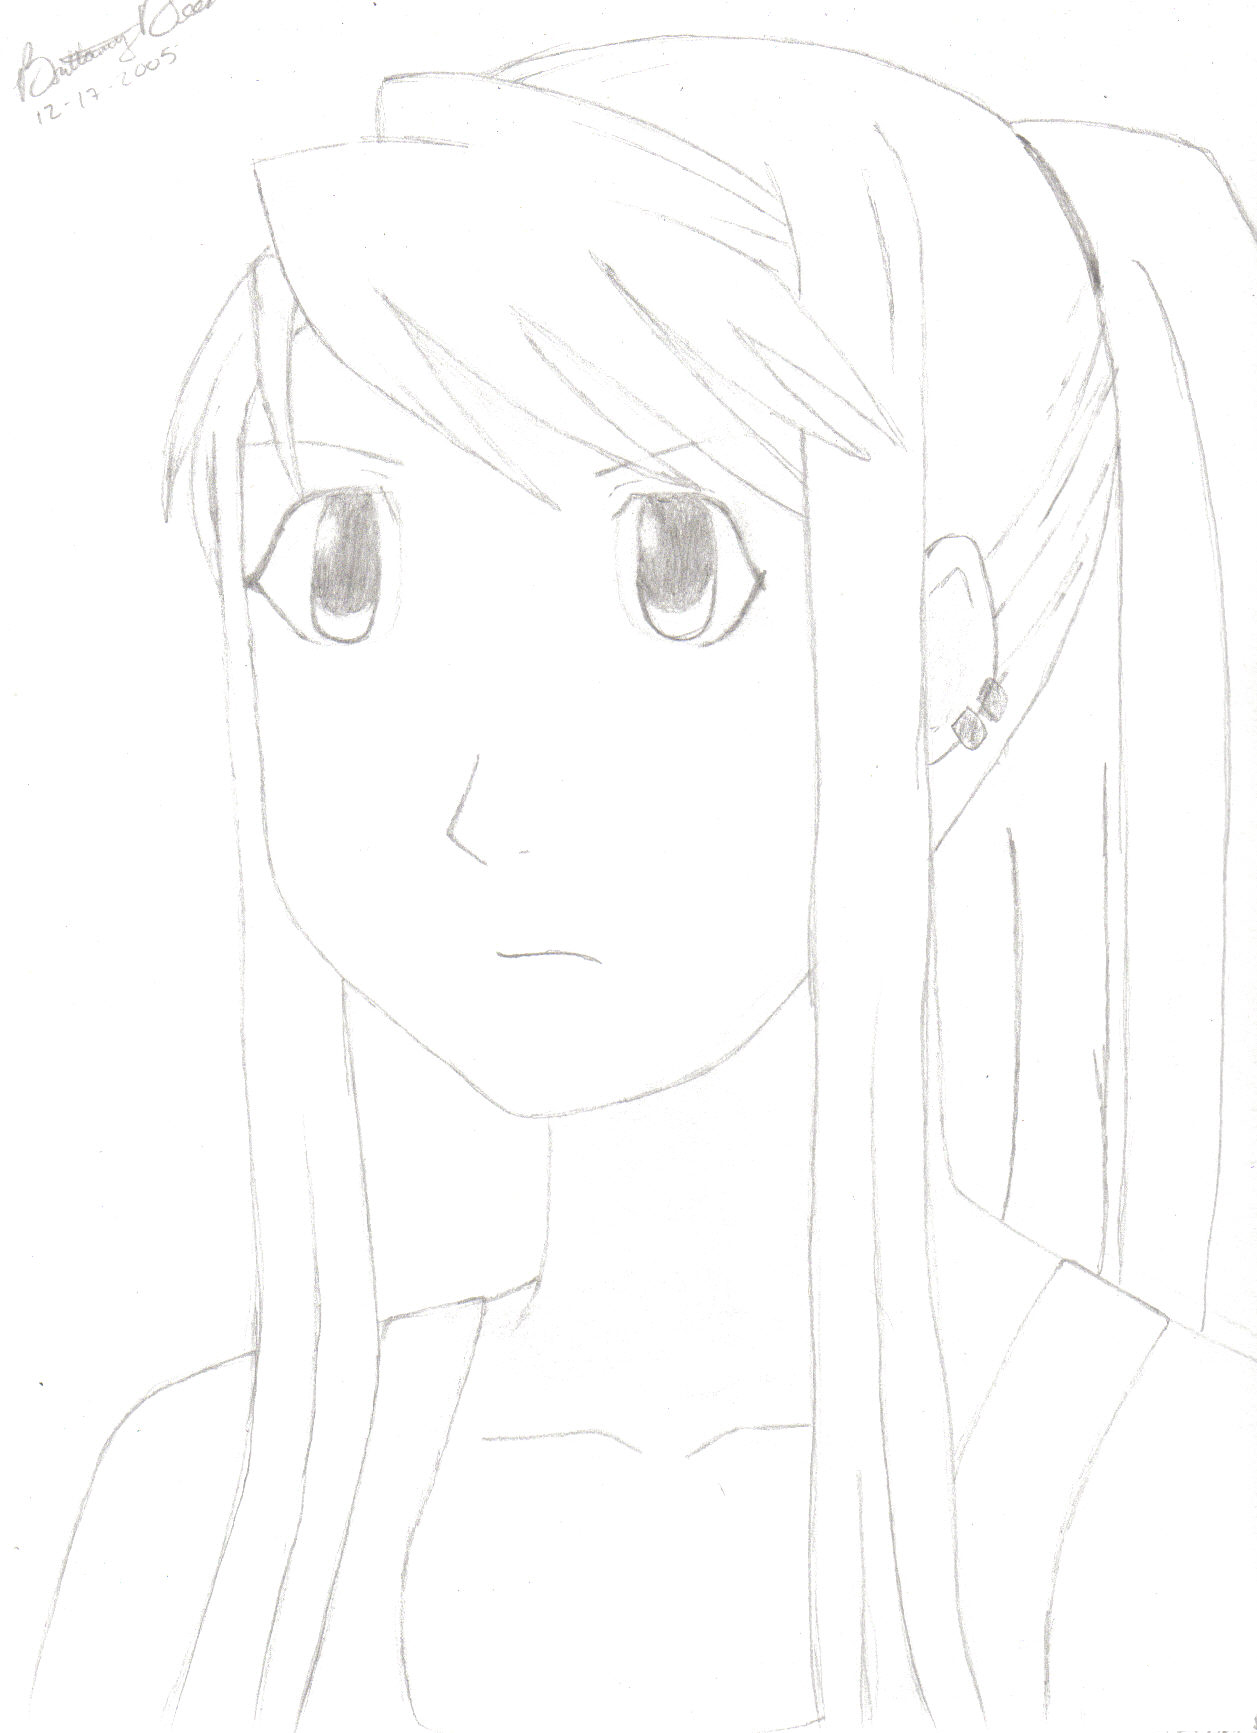 Winry by LuckyYou451